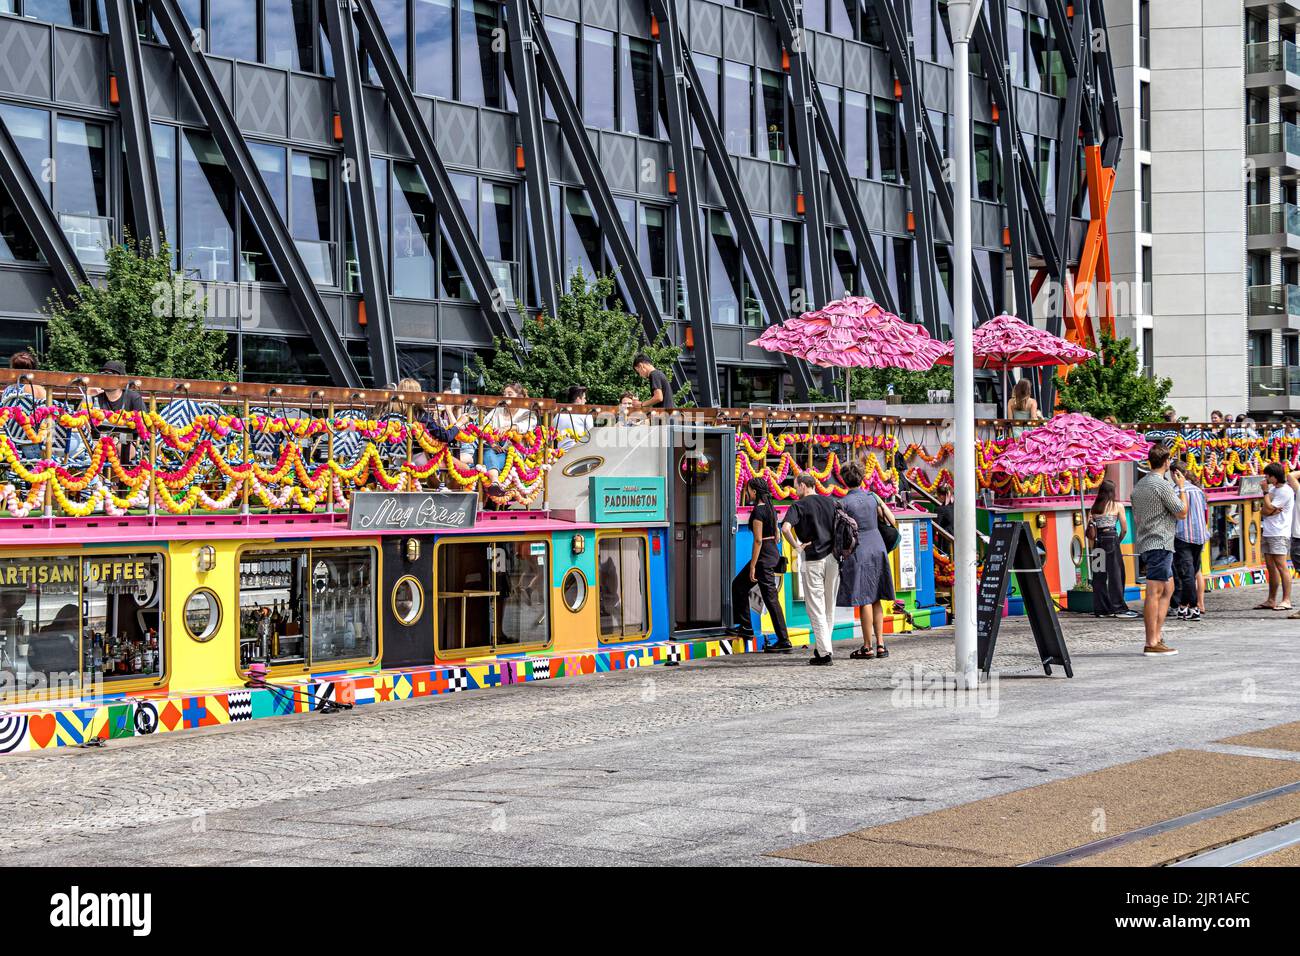 Darcie & May Green , an Australian restaurant on a barge Vibrant eatery on a barge designed by pop artist Sir Peter Blake, Paddington,London W2 Stock Photo